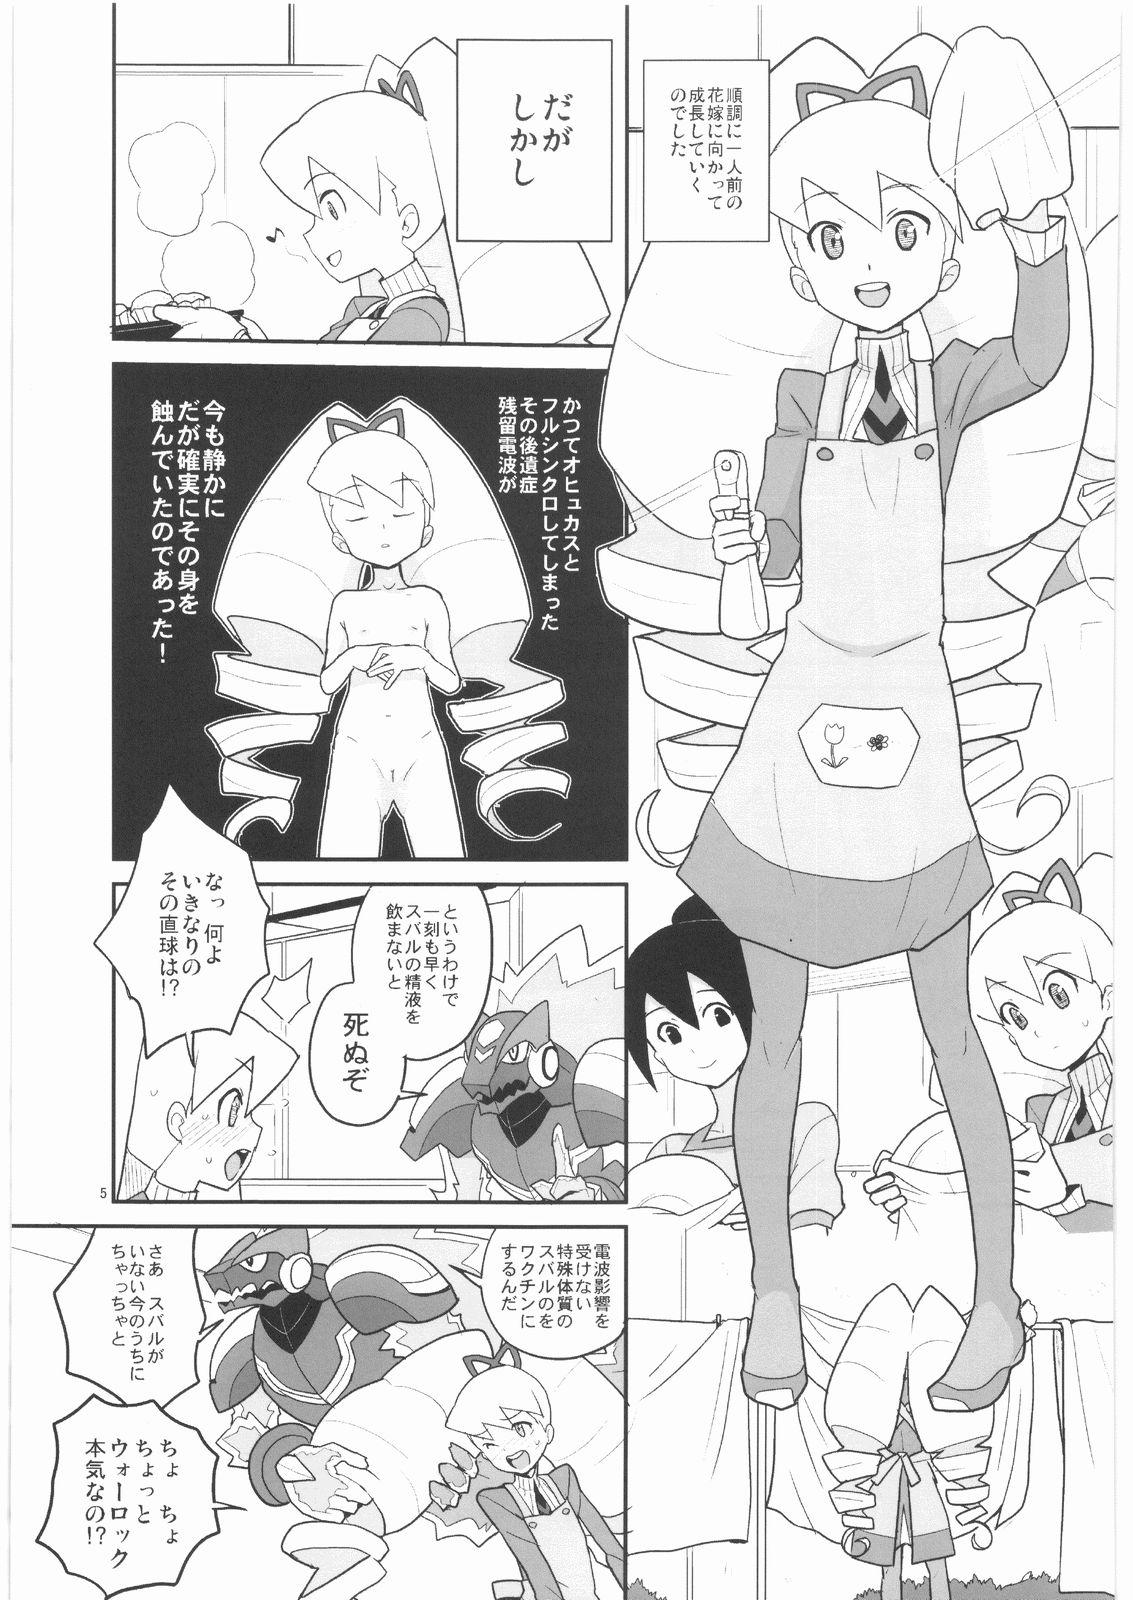 Exhibition Drill to Tights to Iinchou! - Megaman Mega man star force Private - Page 4